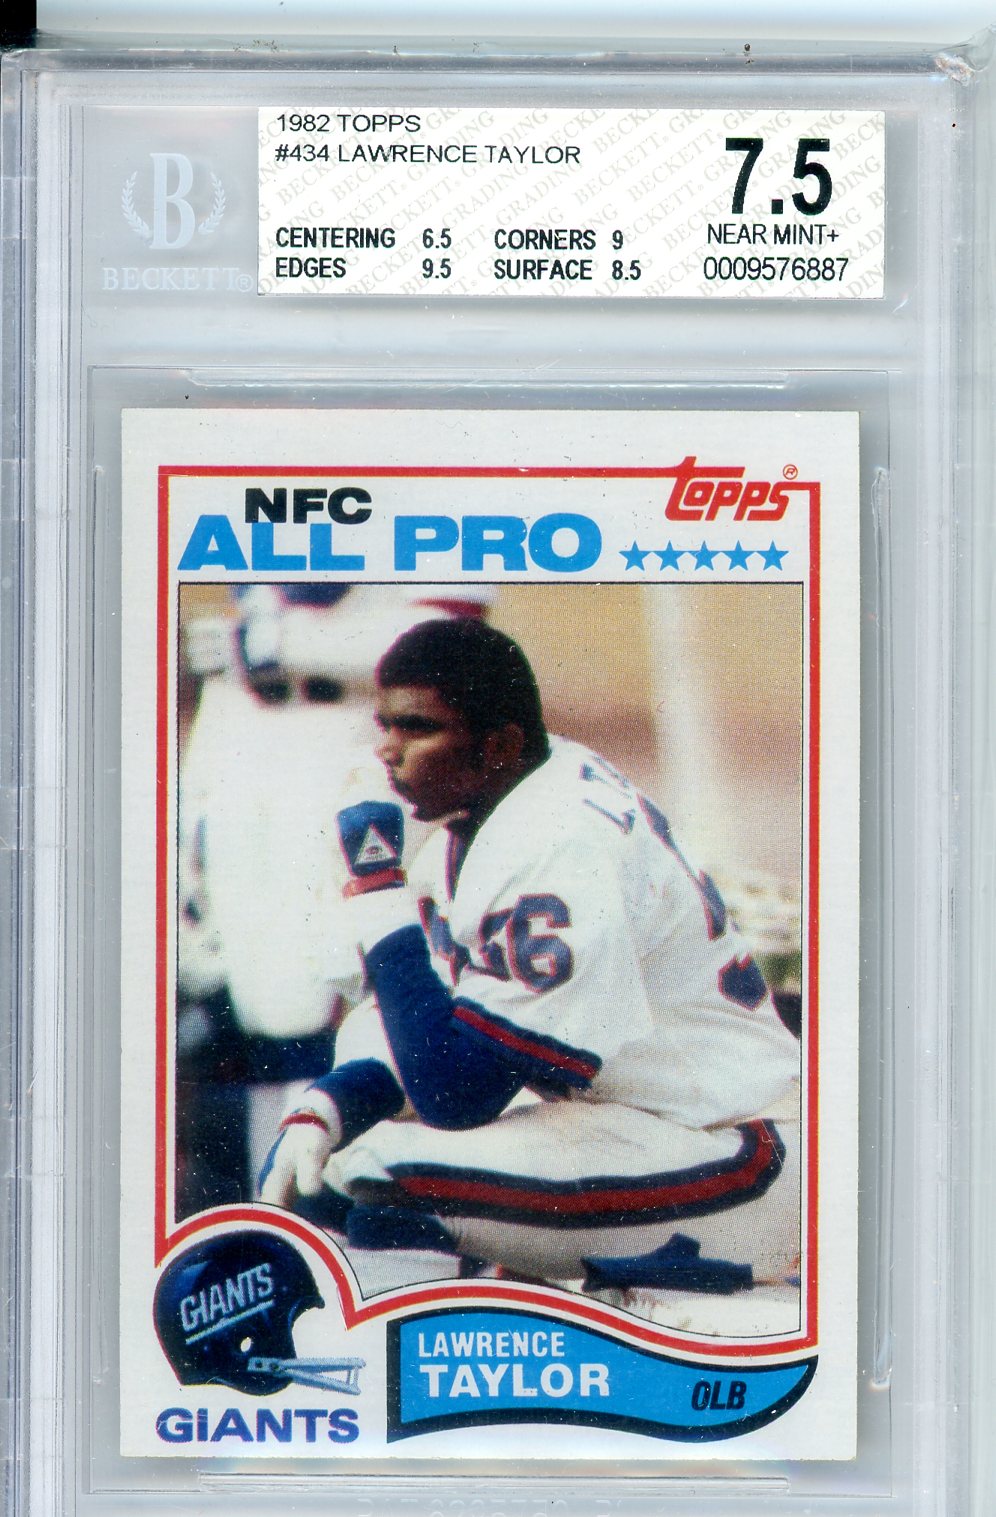 1982 Topps Lawrence Taylor #434 Card BGS 7.5